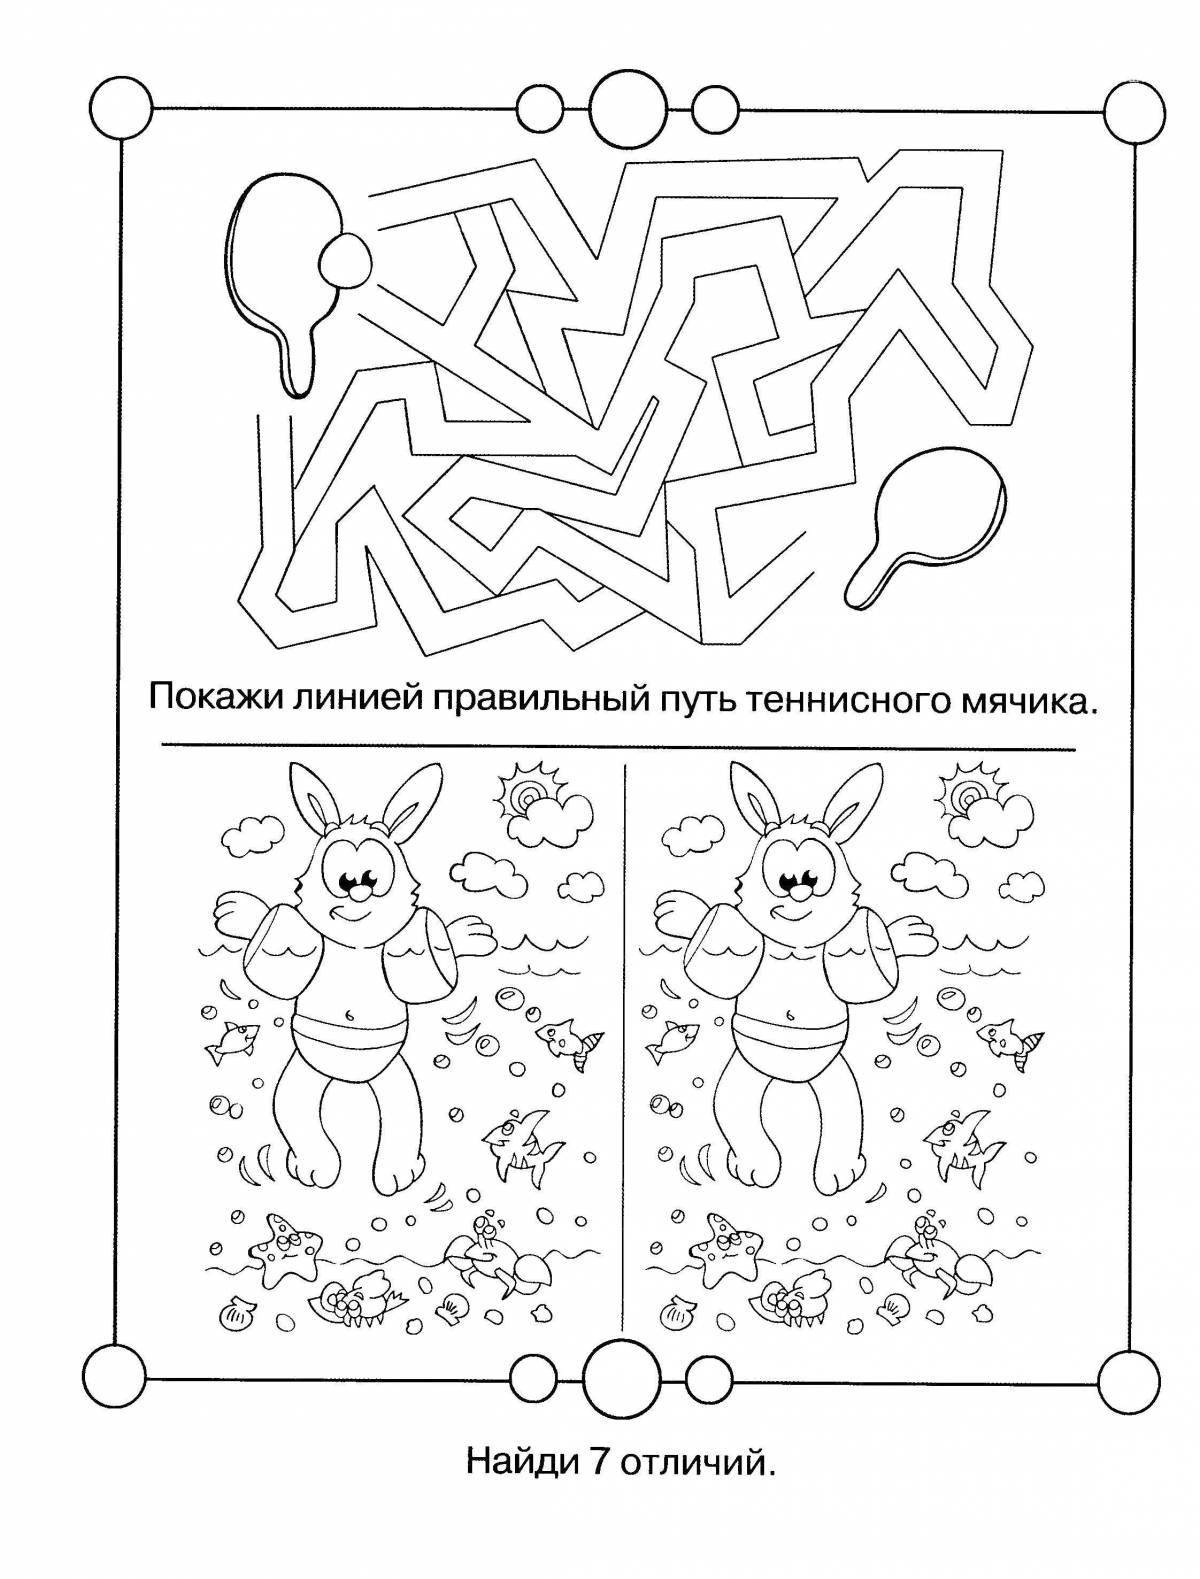 Intriguing logical coloring book for children 4-5 years old